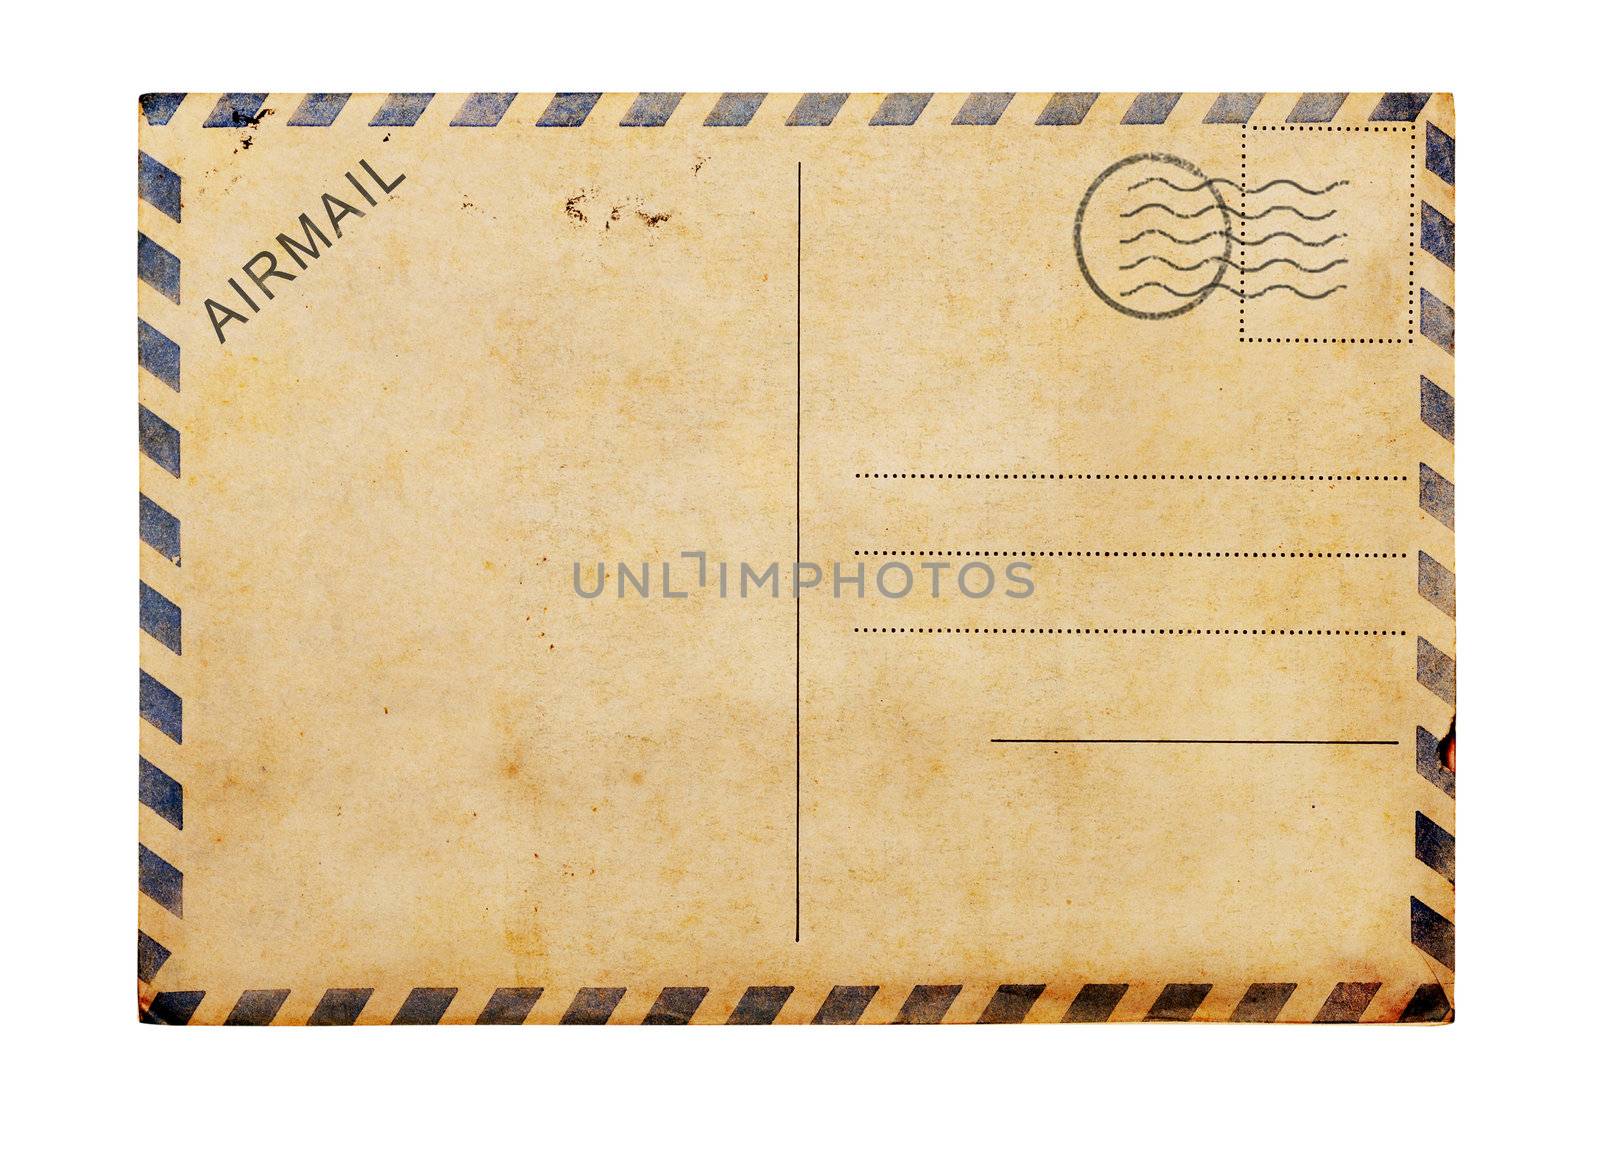 Old blank post card white background, clipping path.